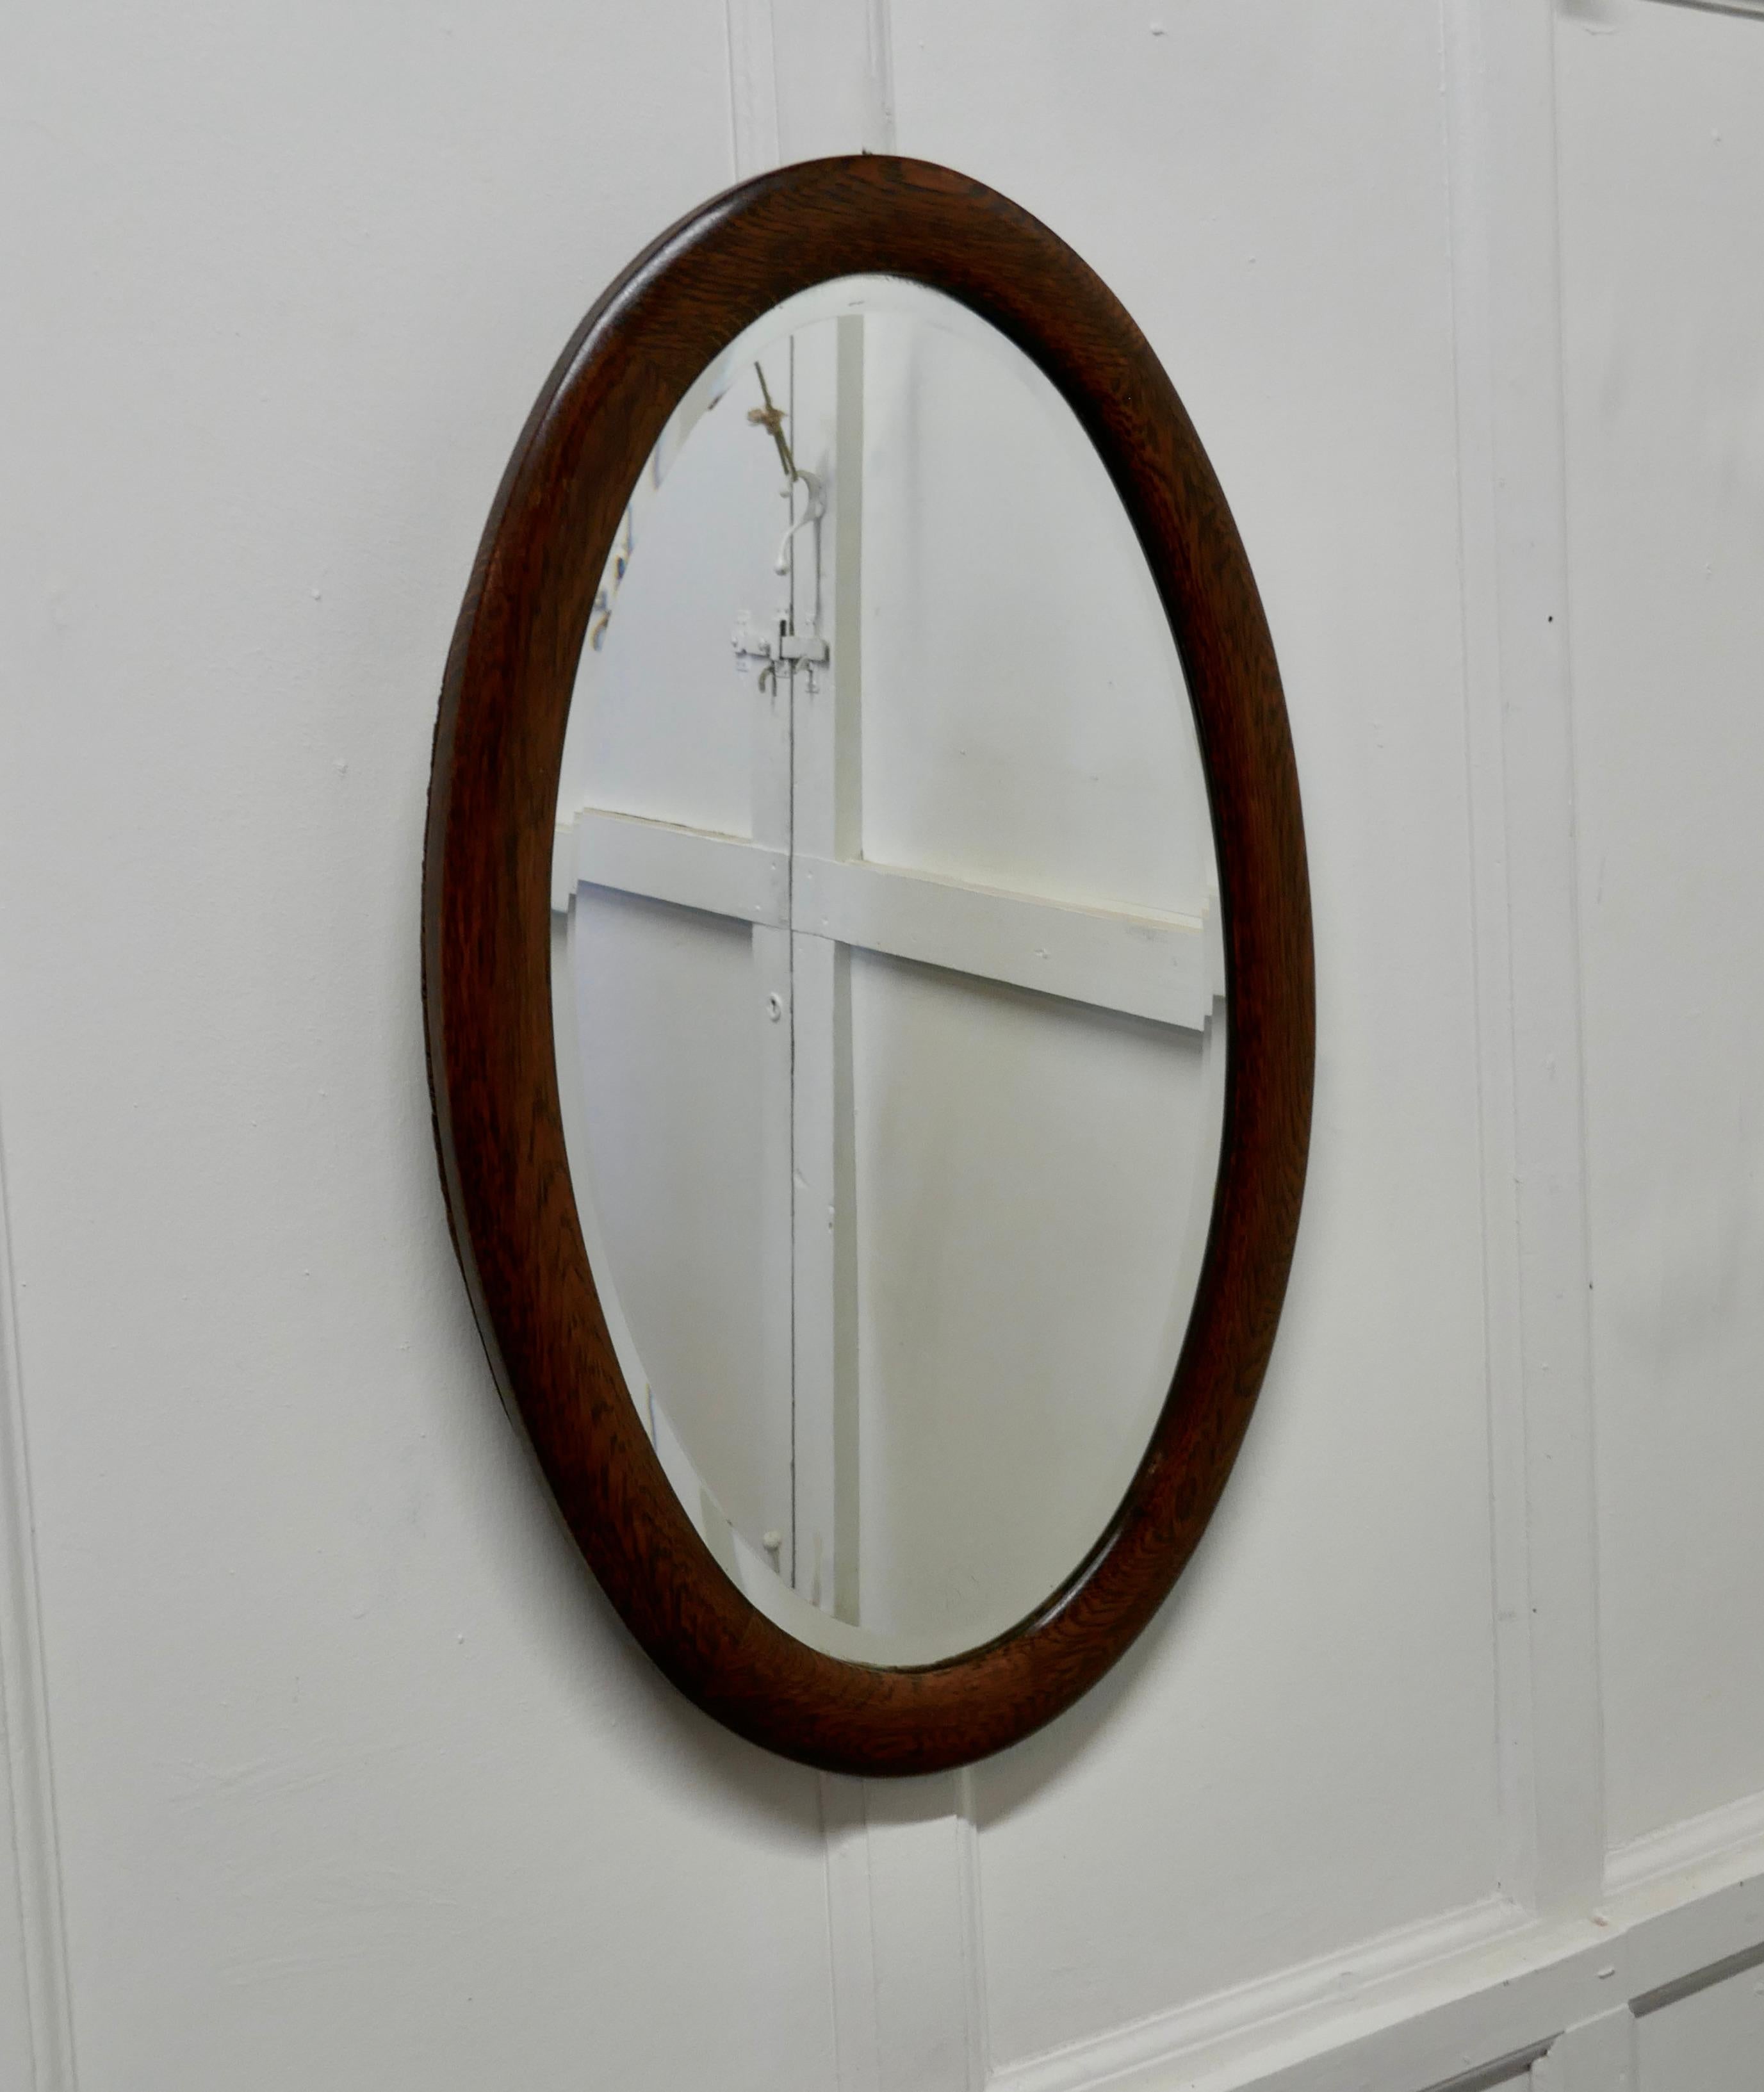 A large Edwardian oak oval mirror

This mirror has a 2” wide moulded oval oak frame 
The large oval frame is in very good condition as is the original oval bevelled looking glass, with only very minor foxing
The mirror is 18” wide and 29” tall